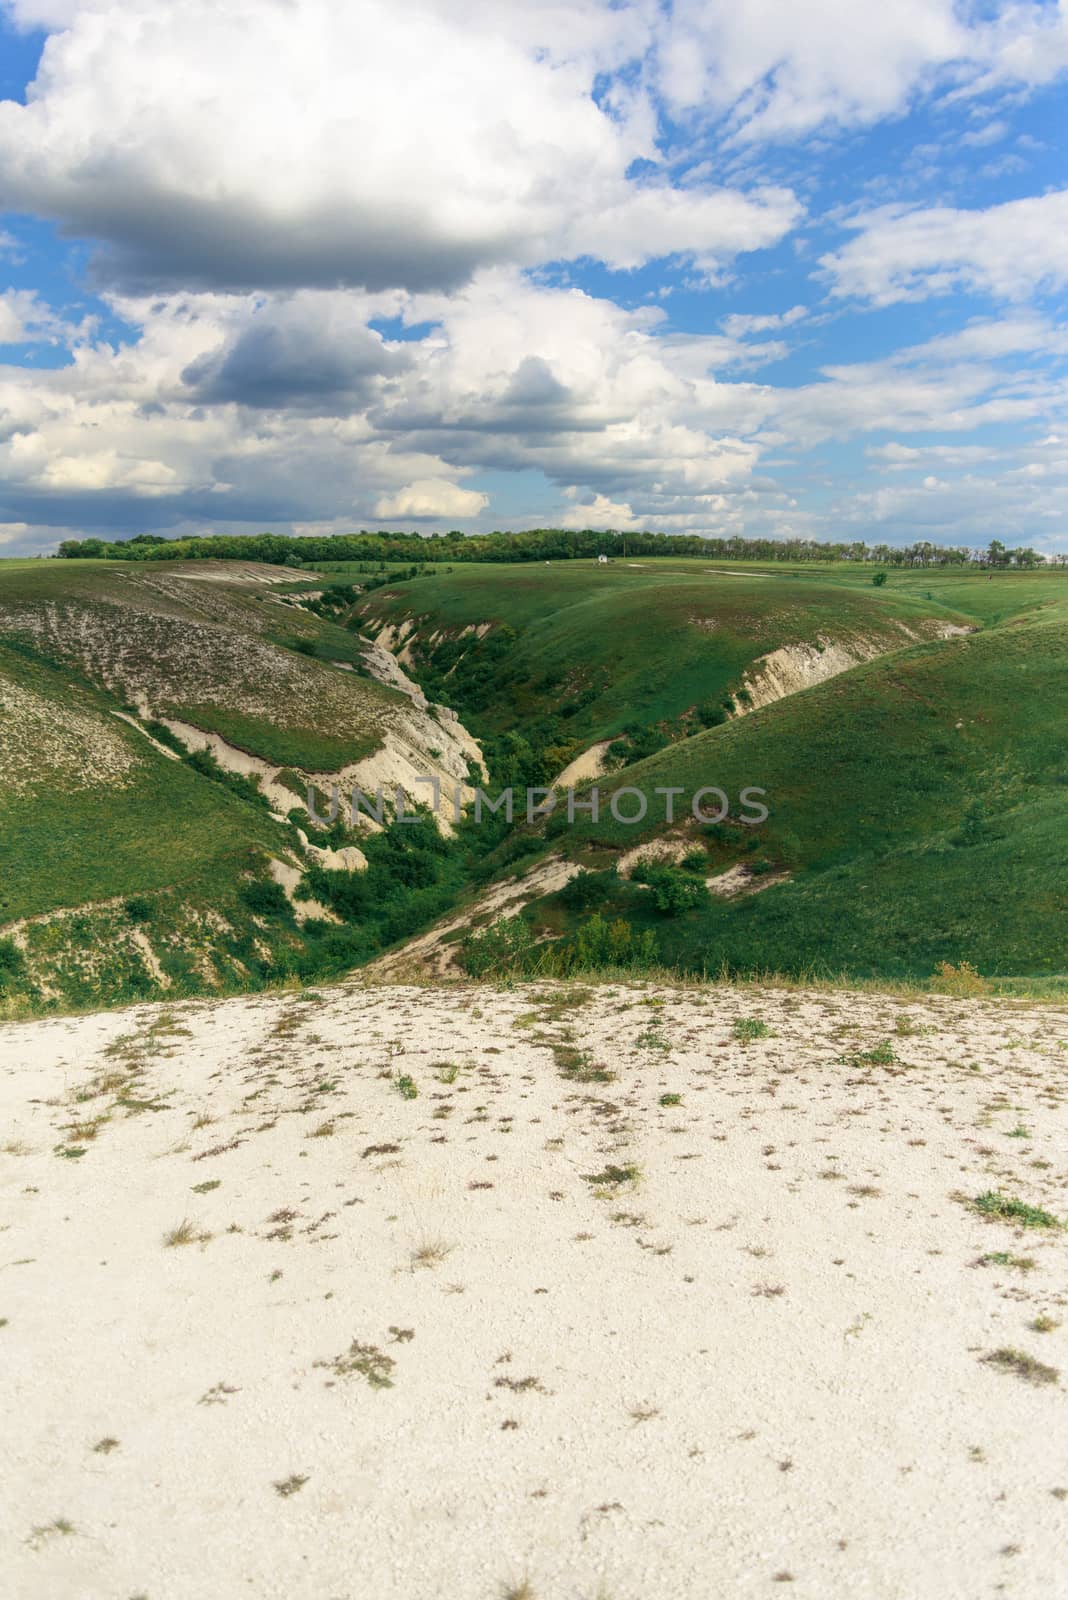 Beautiful view of grassy ravine on sky background with clouds, vertical shot.